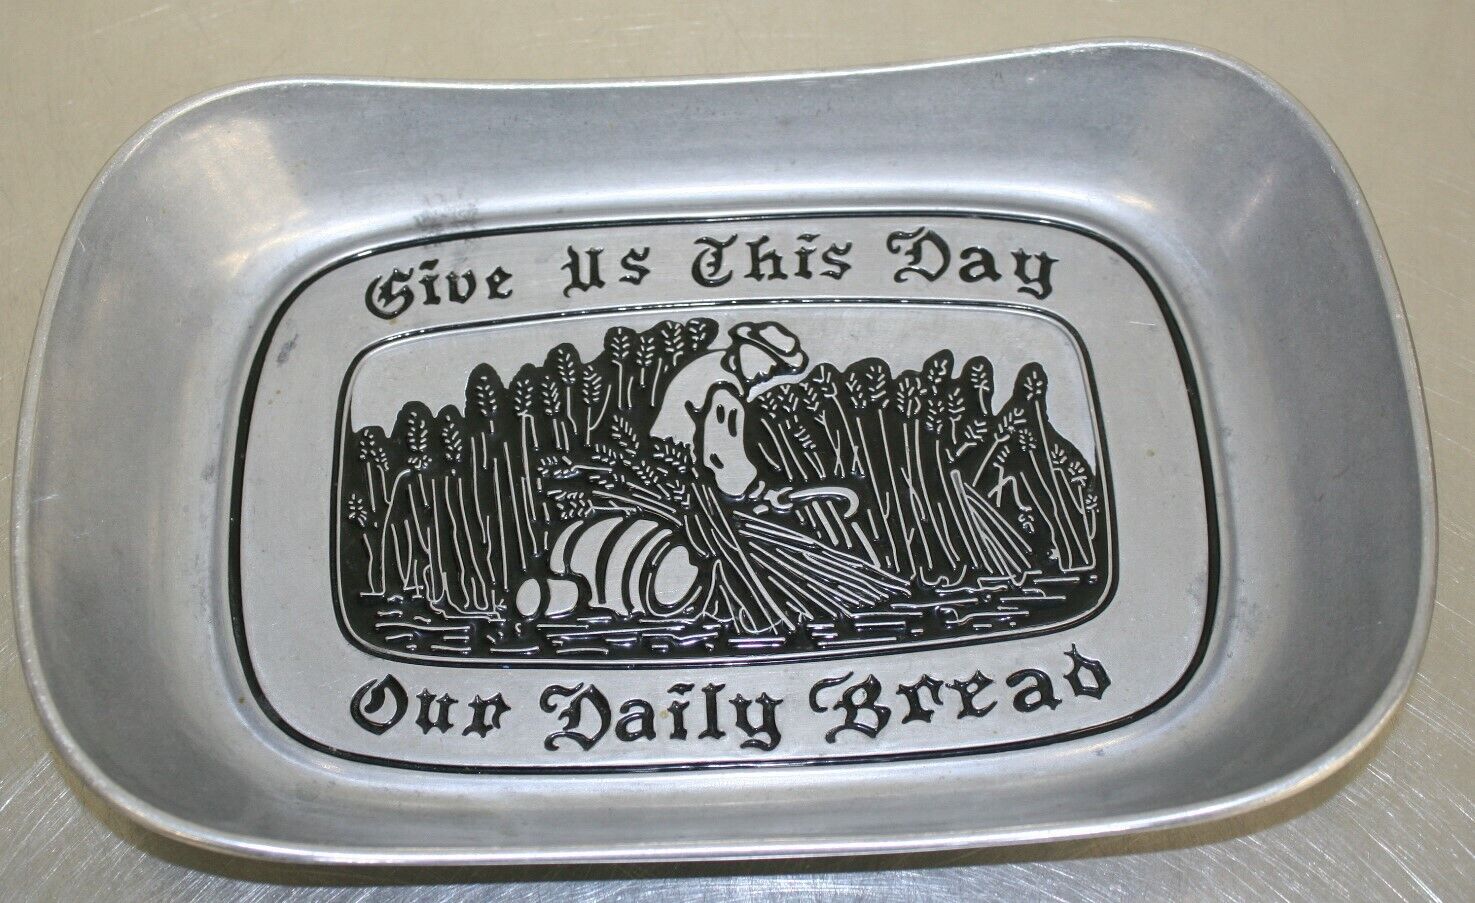 Wilton Armetale RWP Pewter Bread Tray Platter - Give Us This Day Our Daily Bread